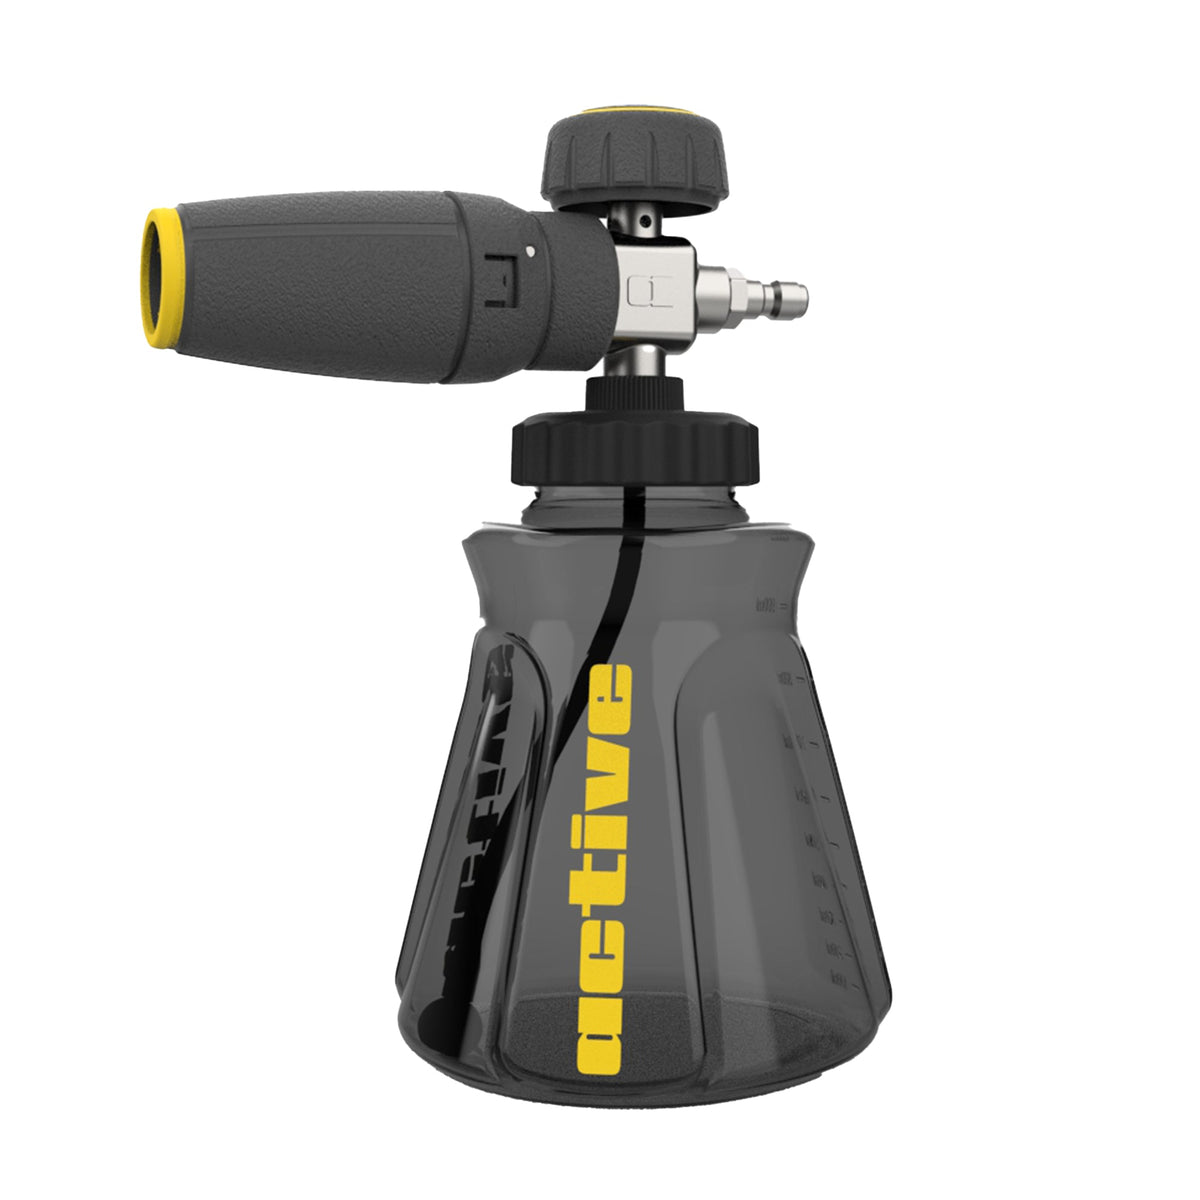 A handheld Active Foam Cannon by Active Products Inc. with a grey and black handle, a clear measurement-marked bottle, and a yellow label marked "active.